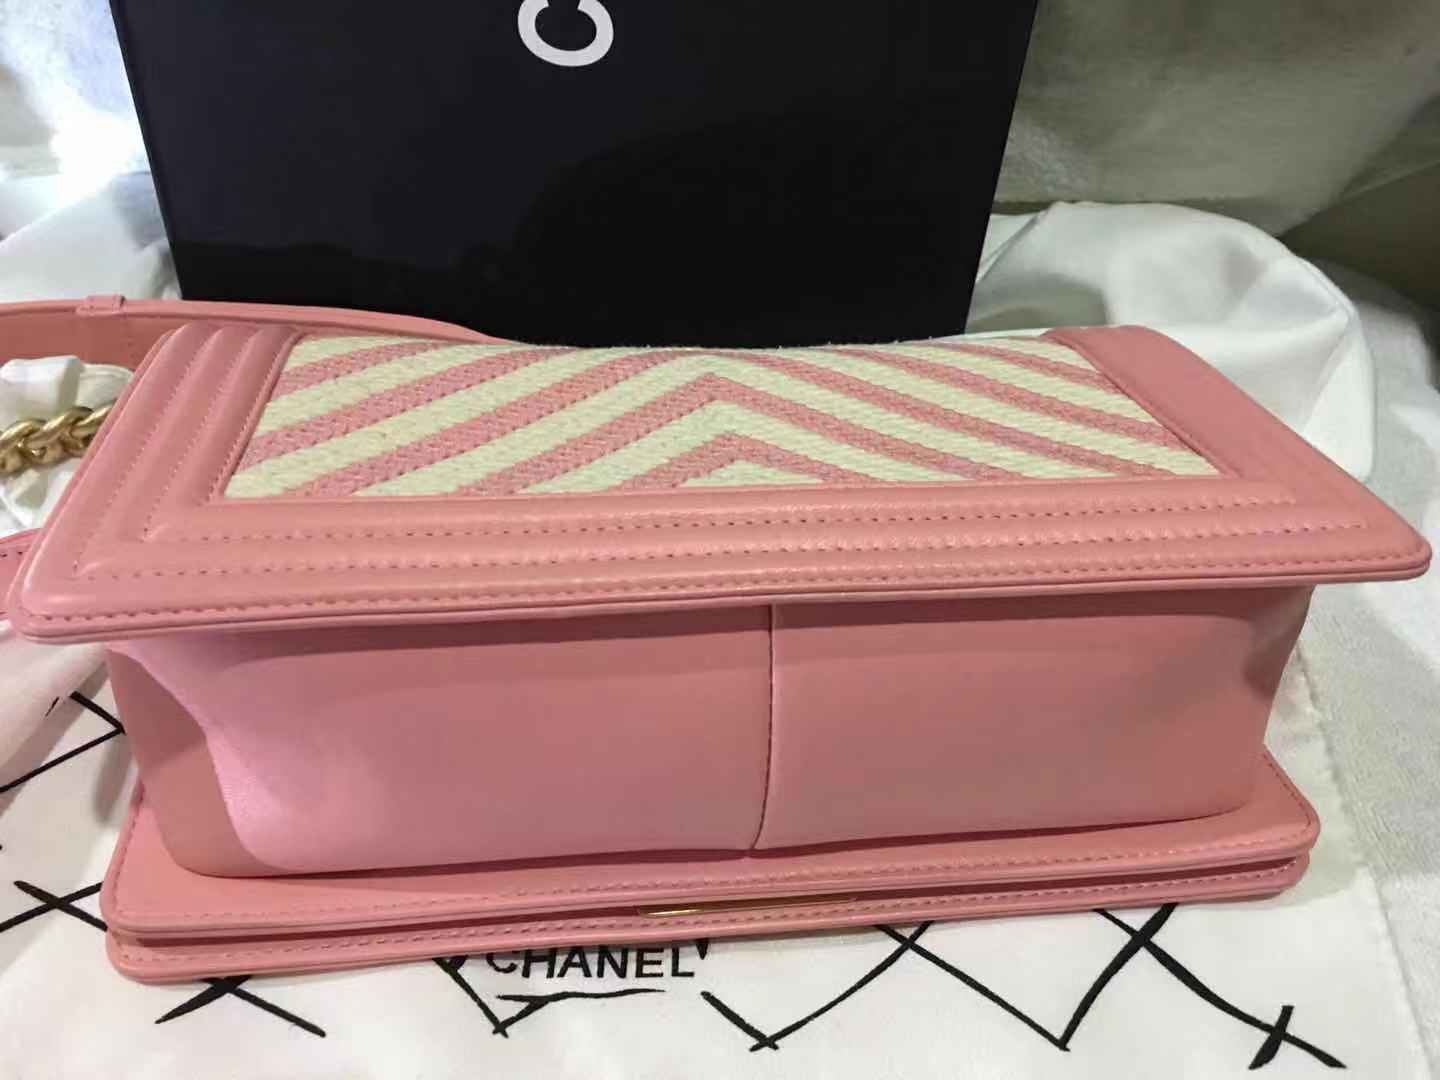 Chanel Pink fabric chevron with gold hardware - Image 5 of 8